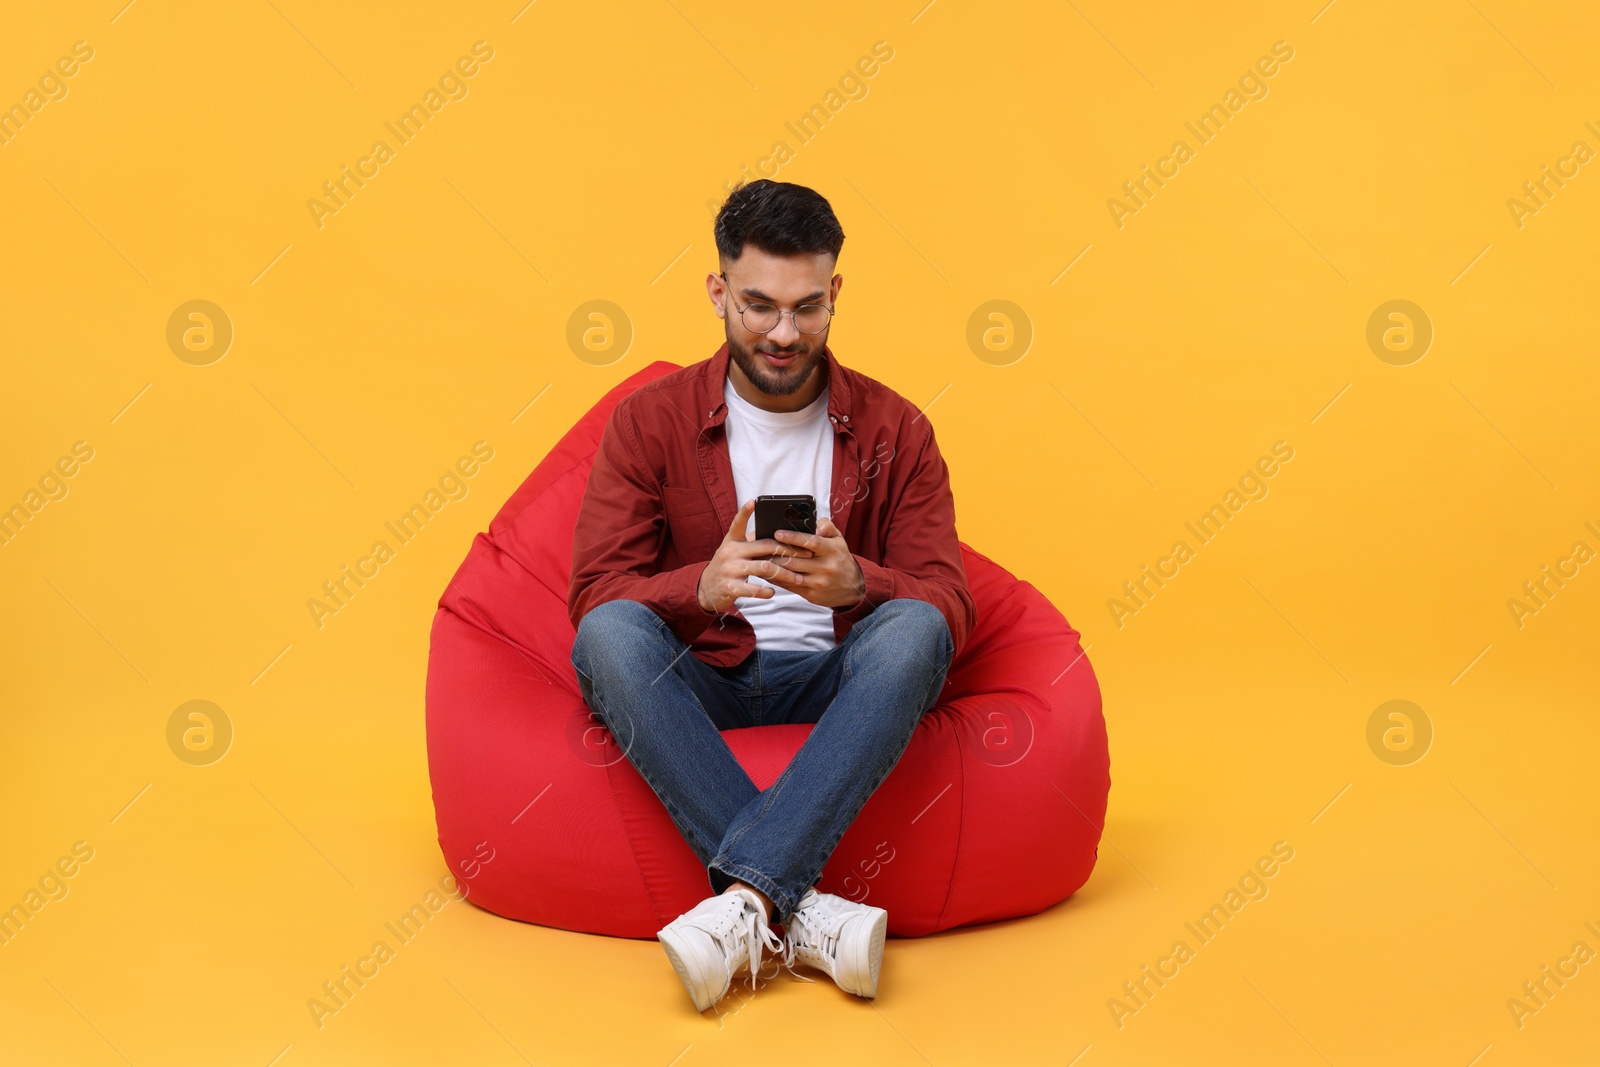 Photo of Handsome young man using smartphone on bean bag chair against yellow background